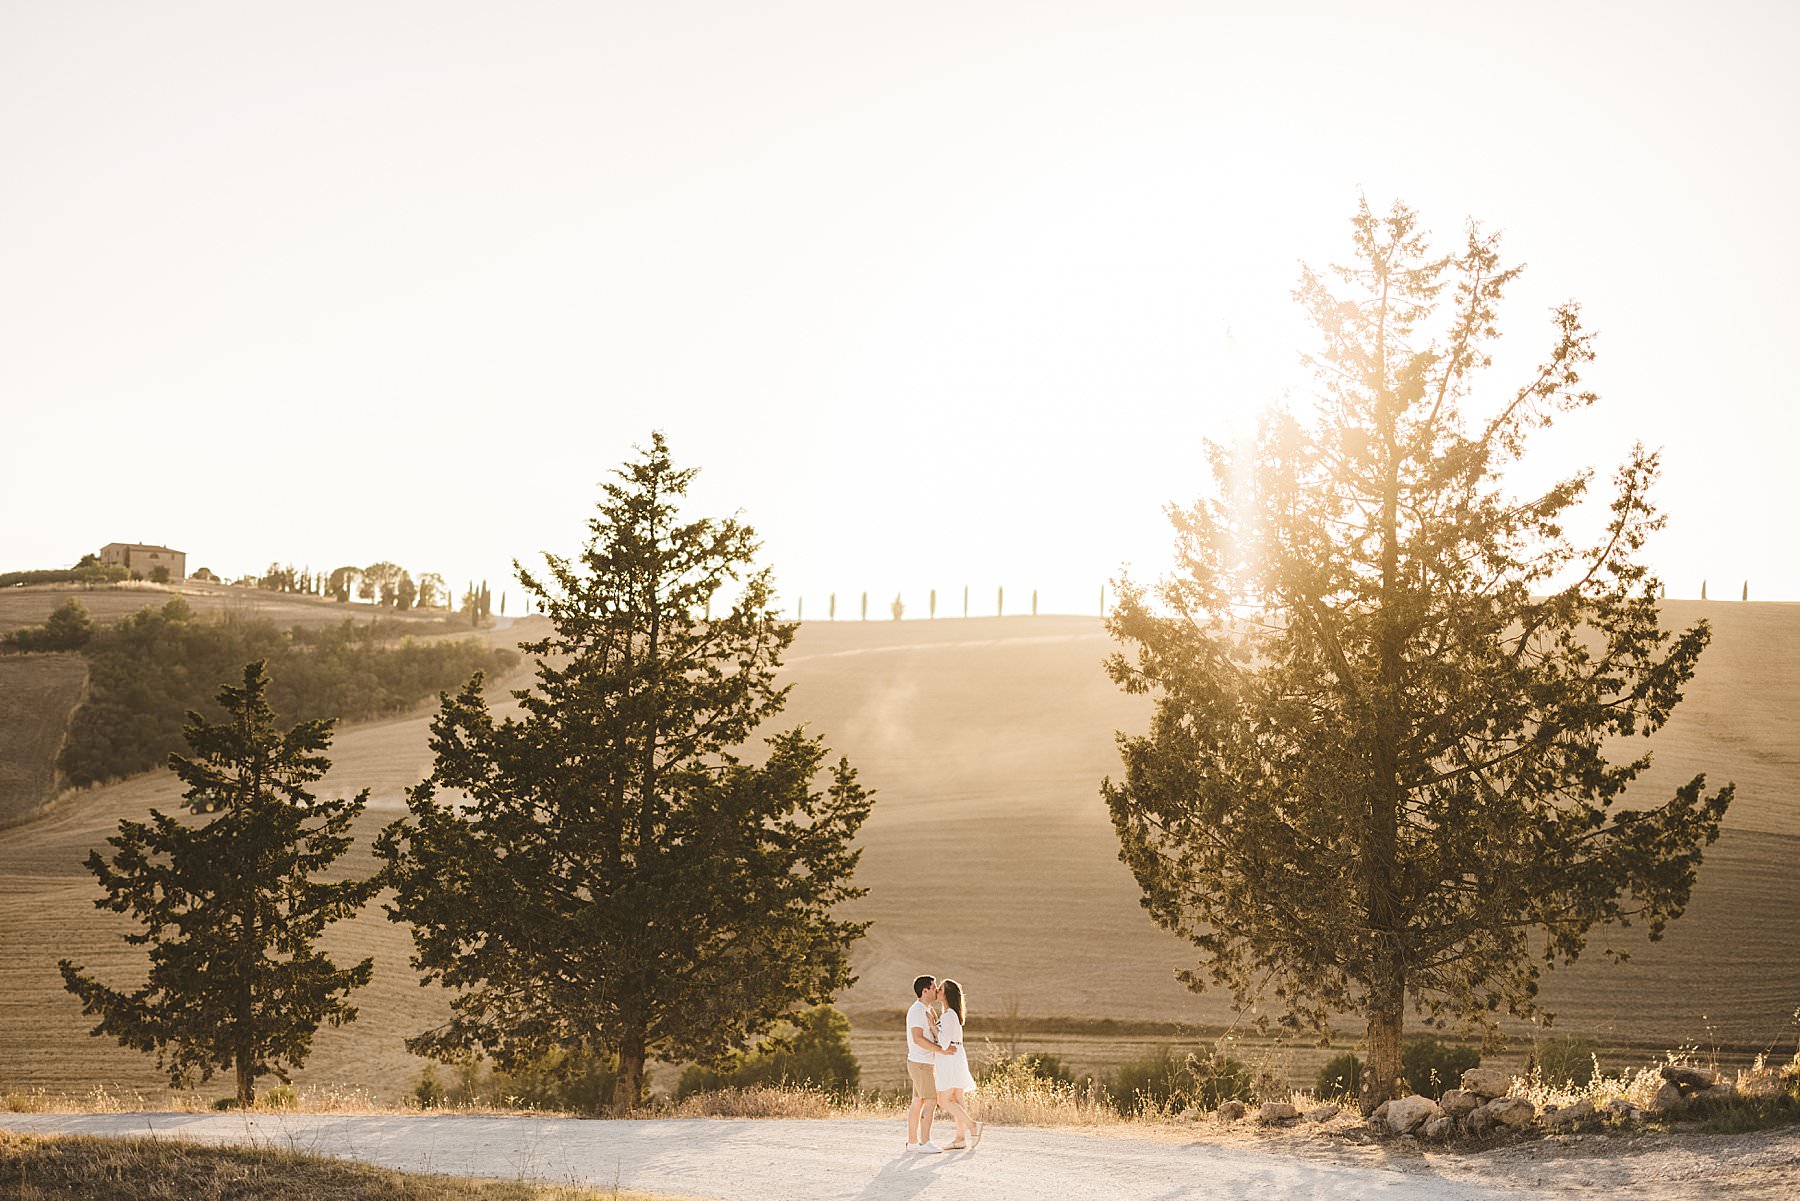 Romantic couple photoshoot in the iconic scenic countryside of Tuscany near Pienza